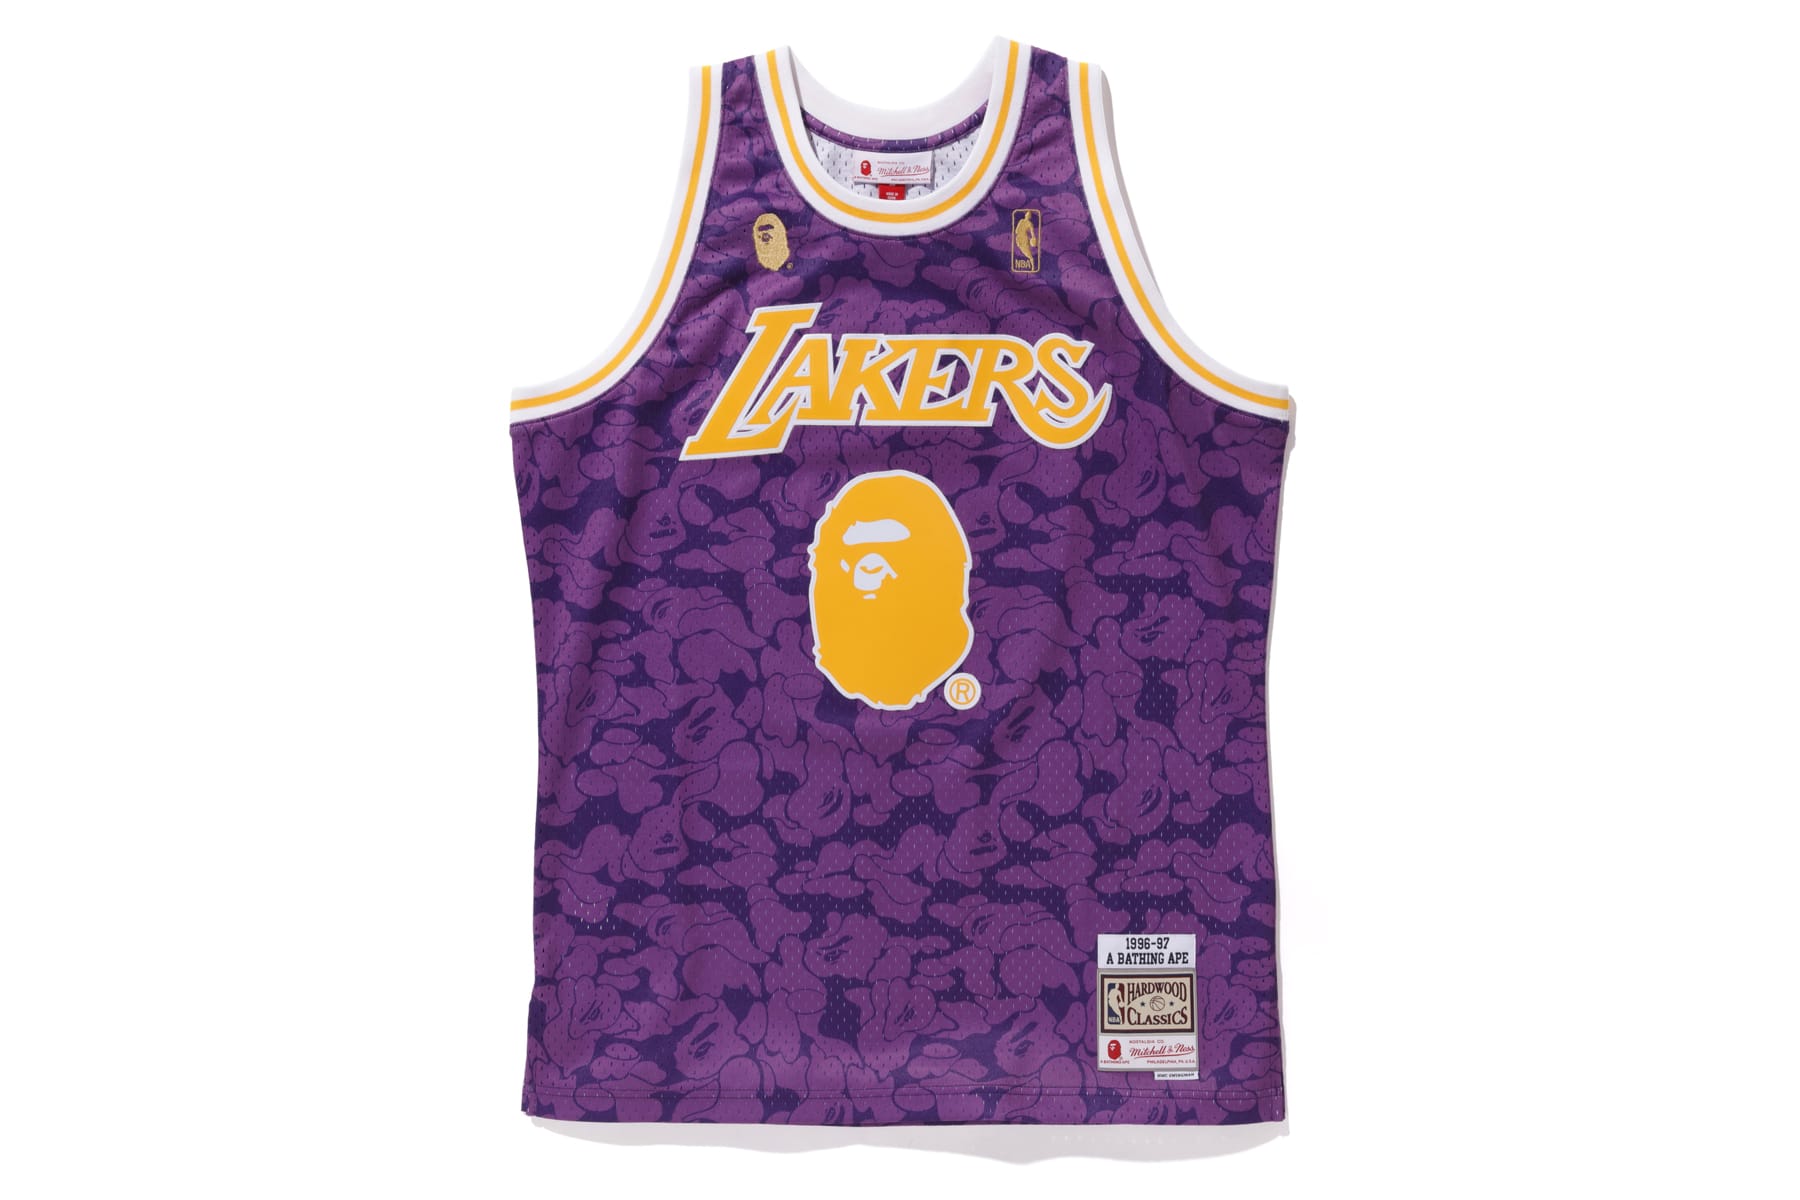 where can i buy lakers jersey